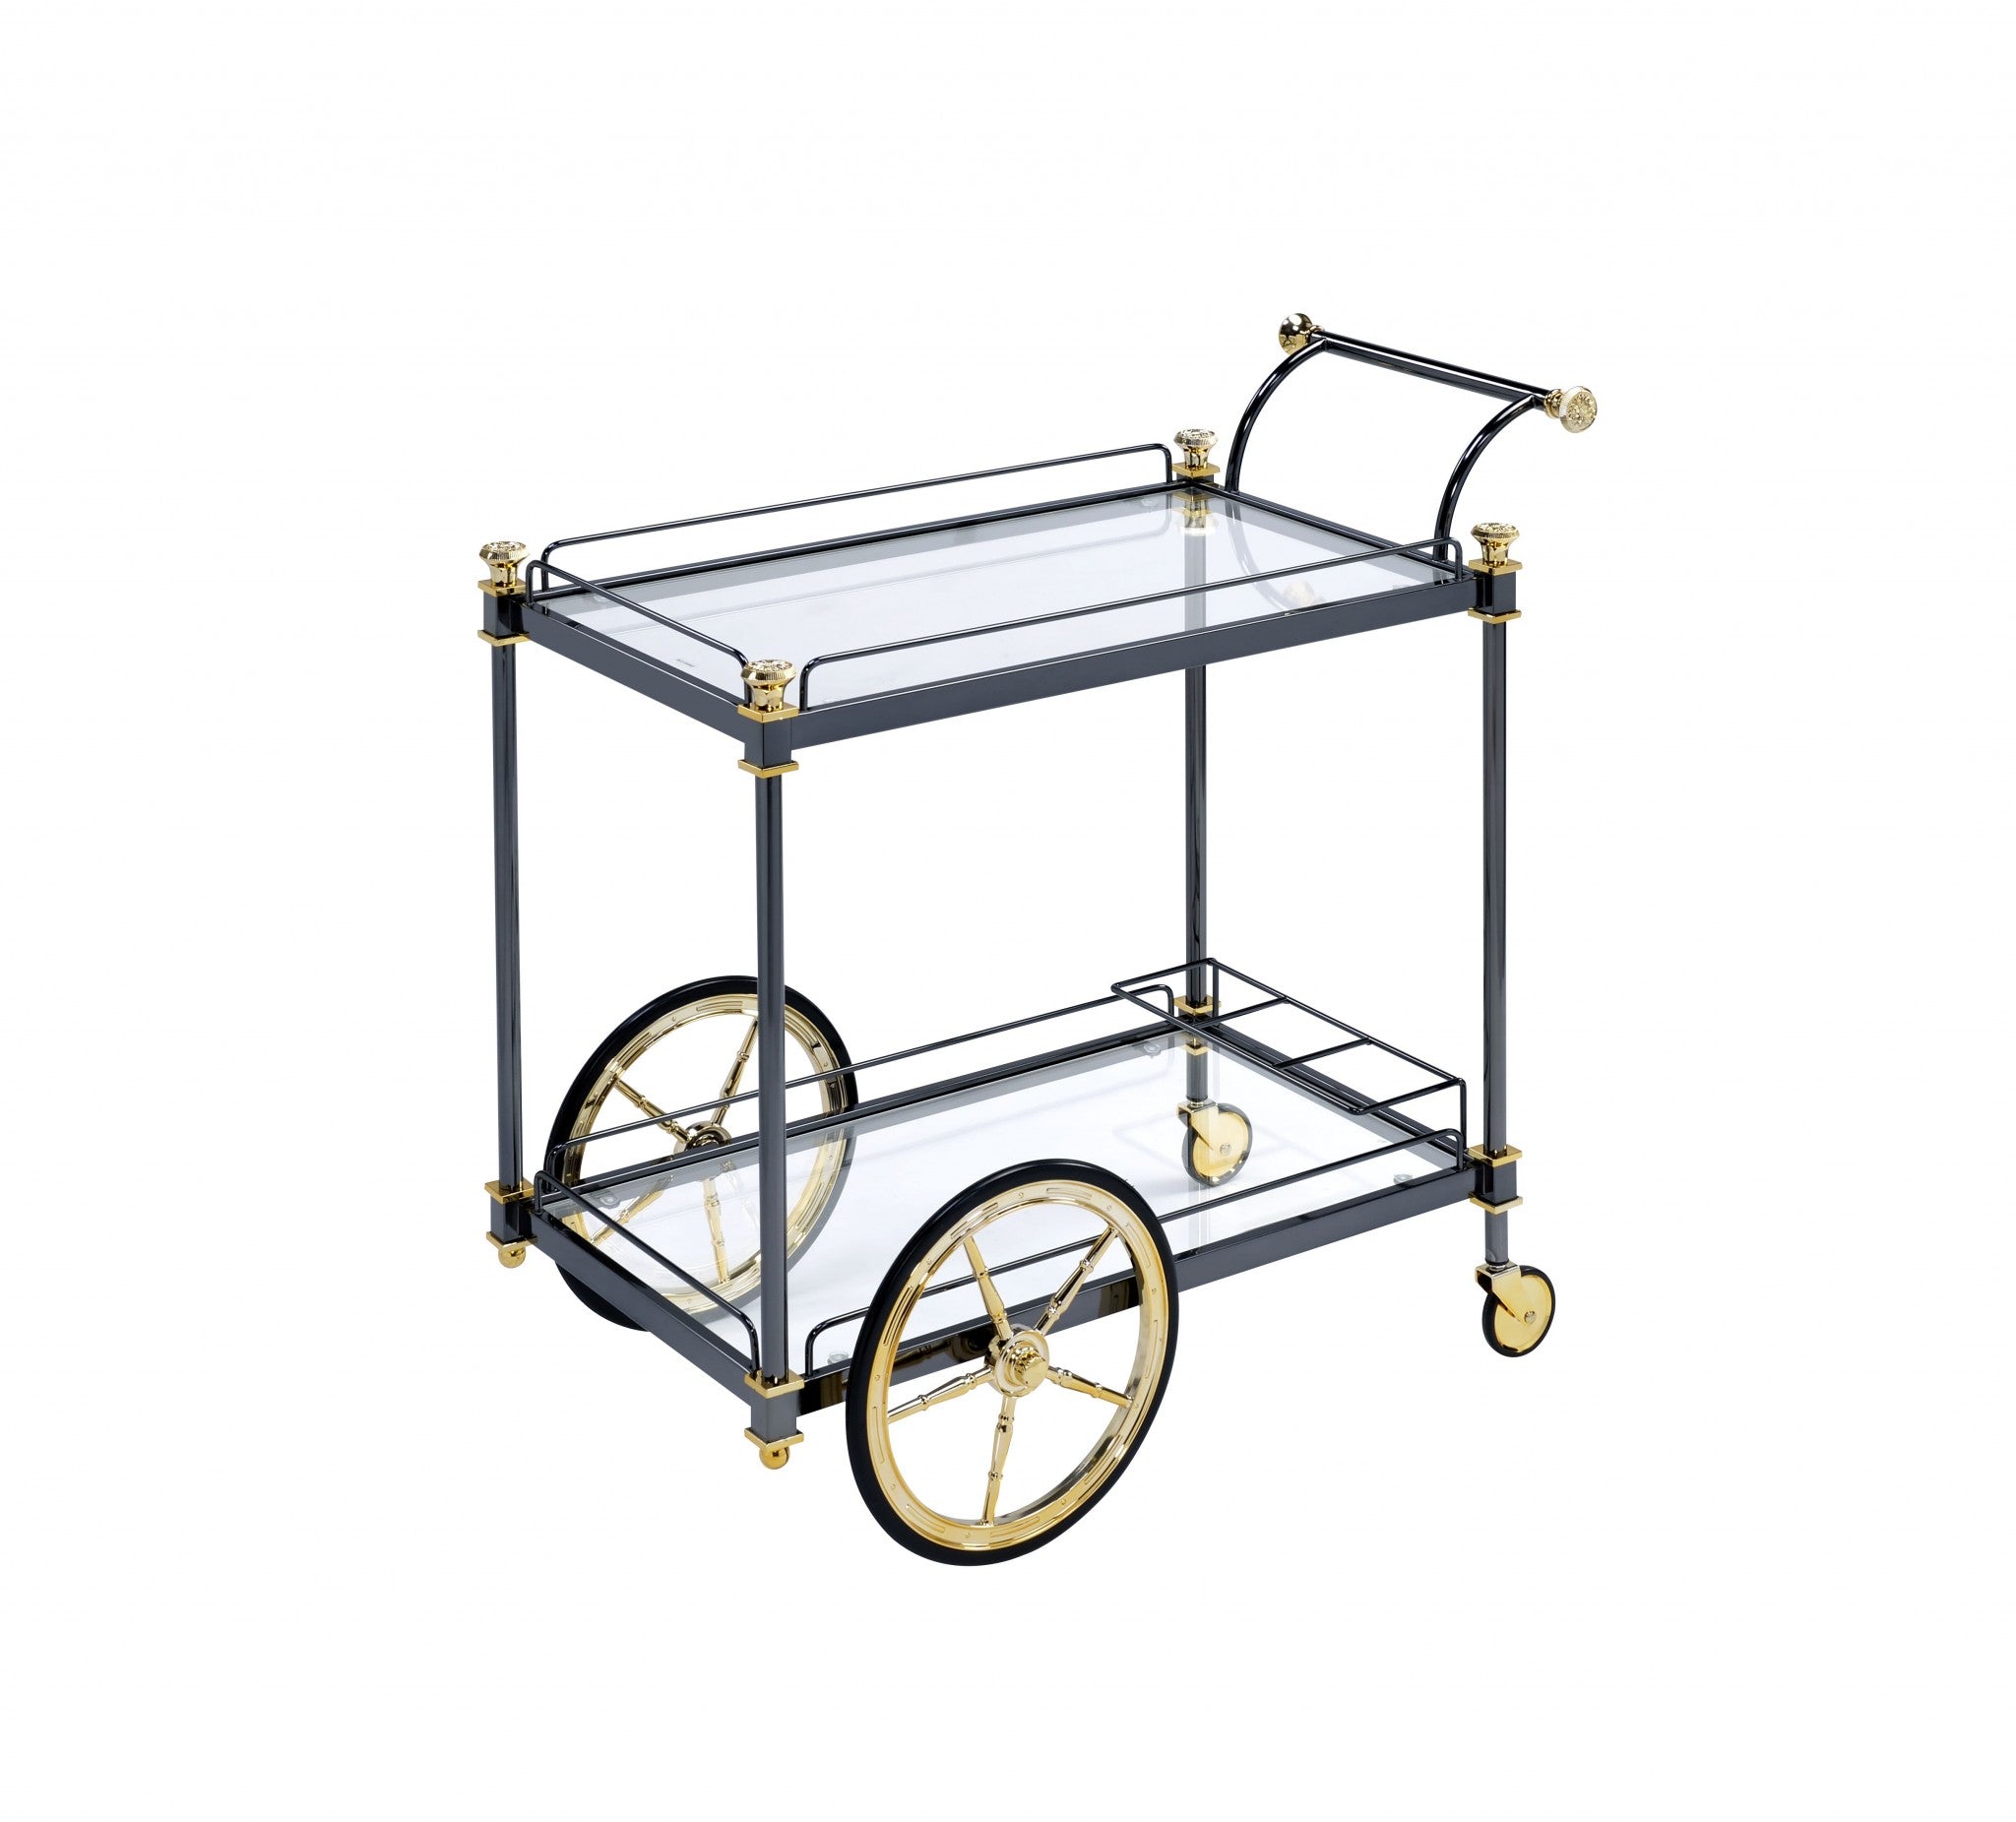 20' X 31' X 31' Black Gold Clear Glass Metal Casters Serving Cart